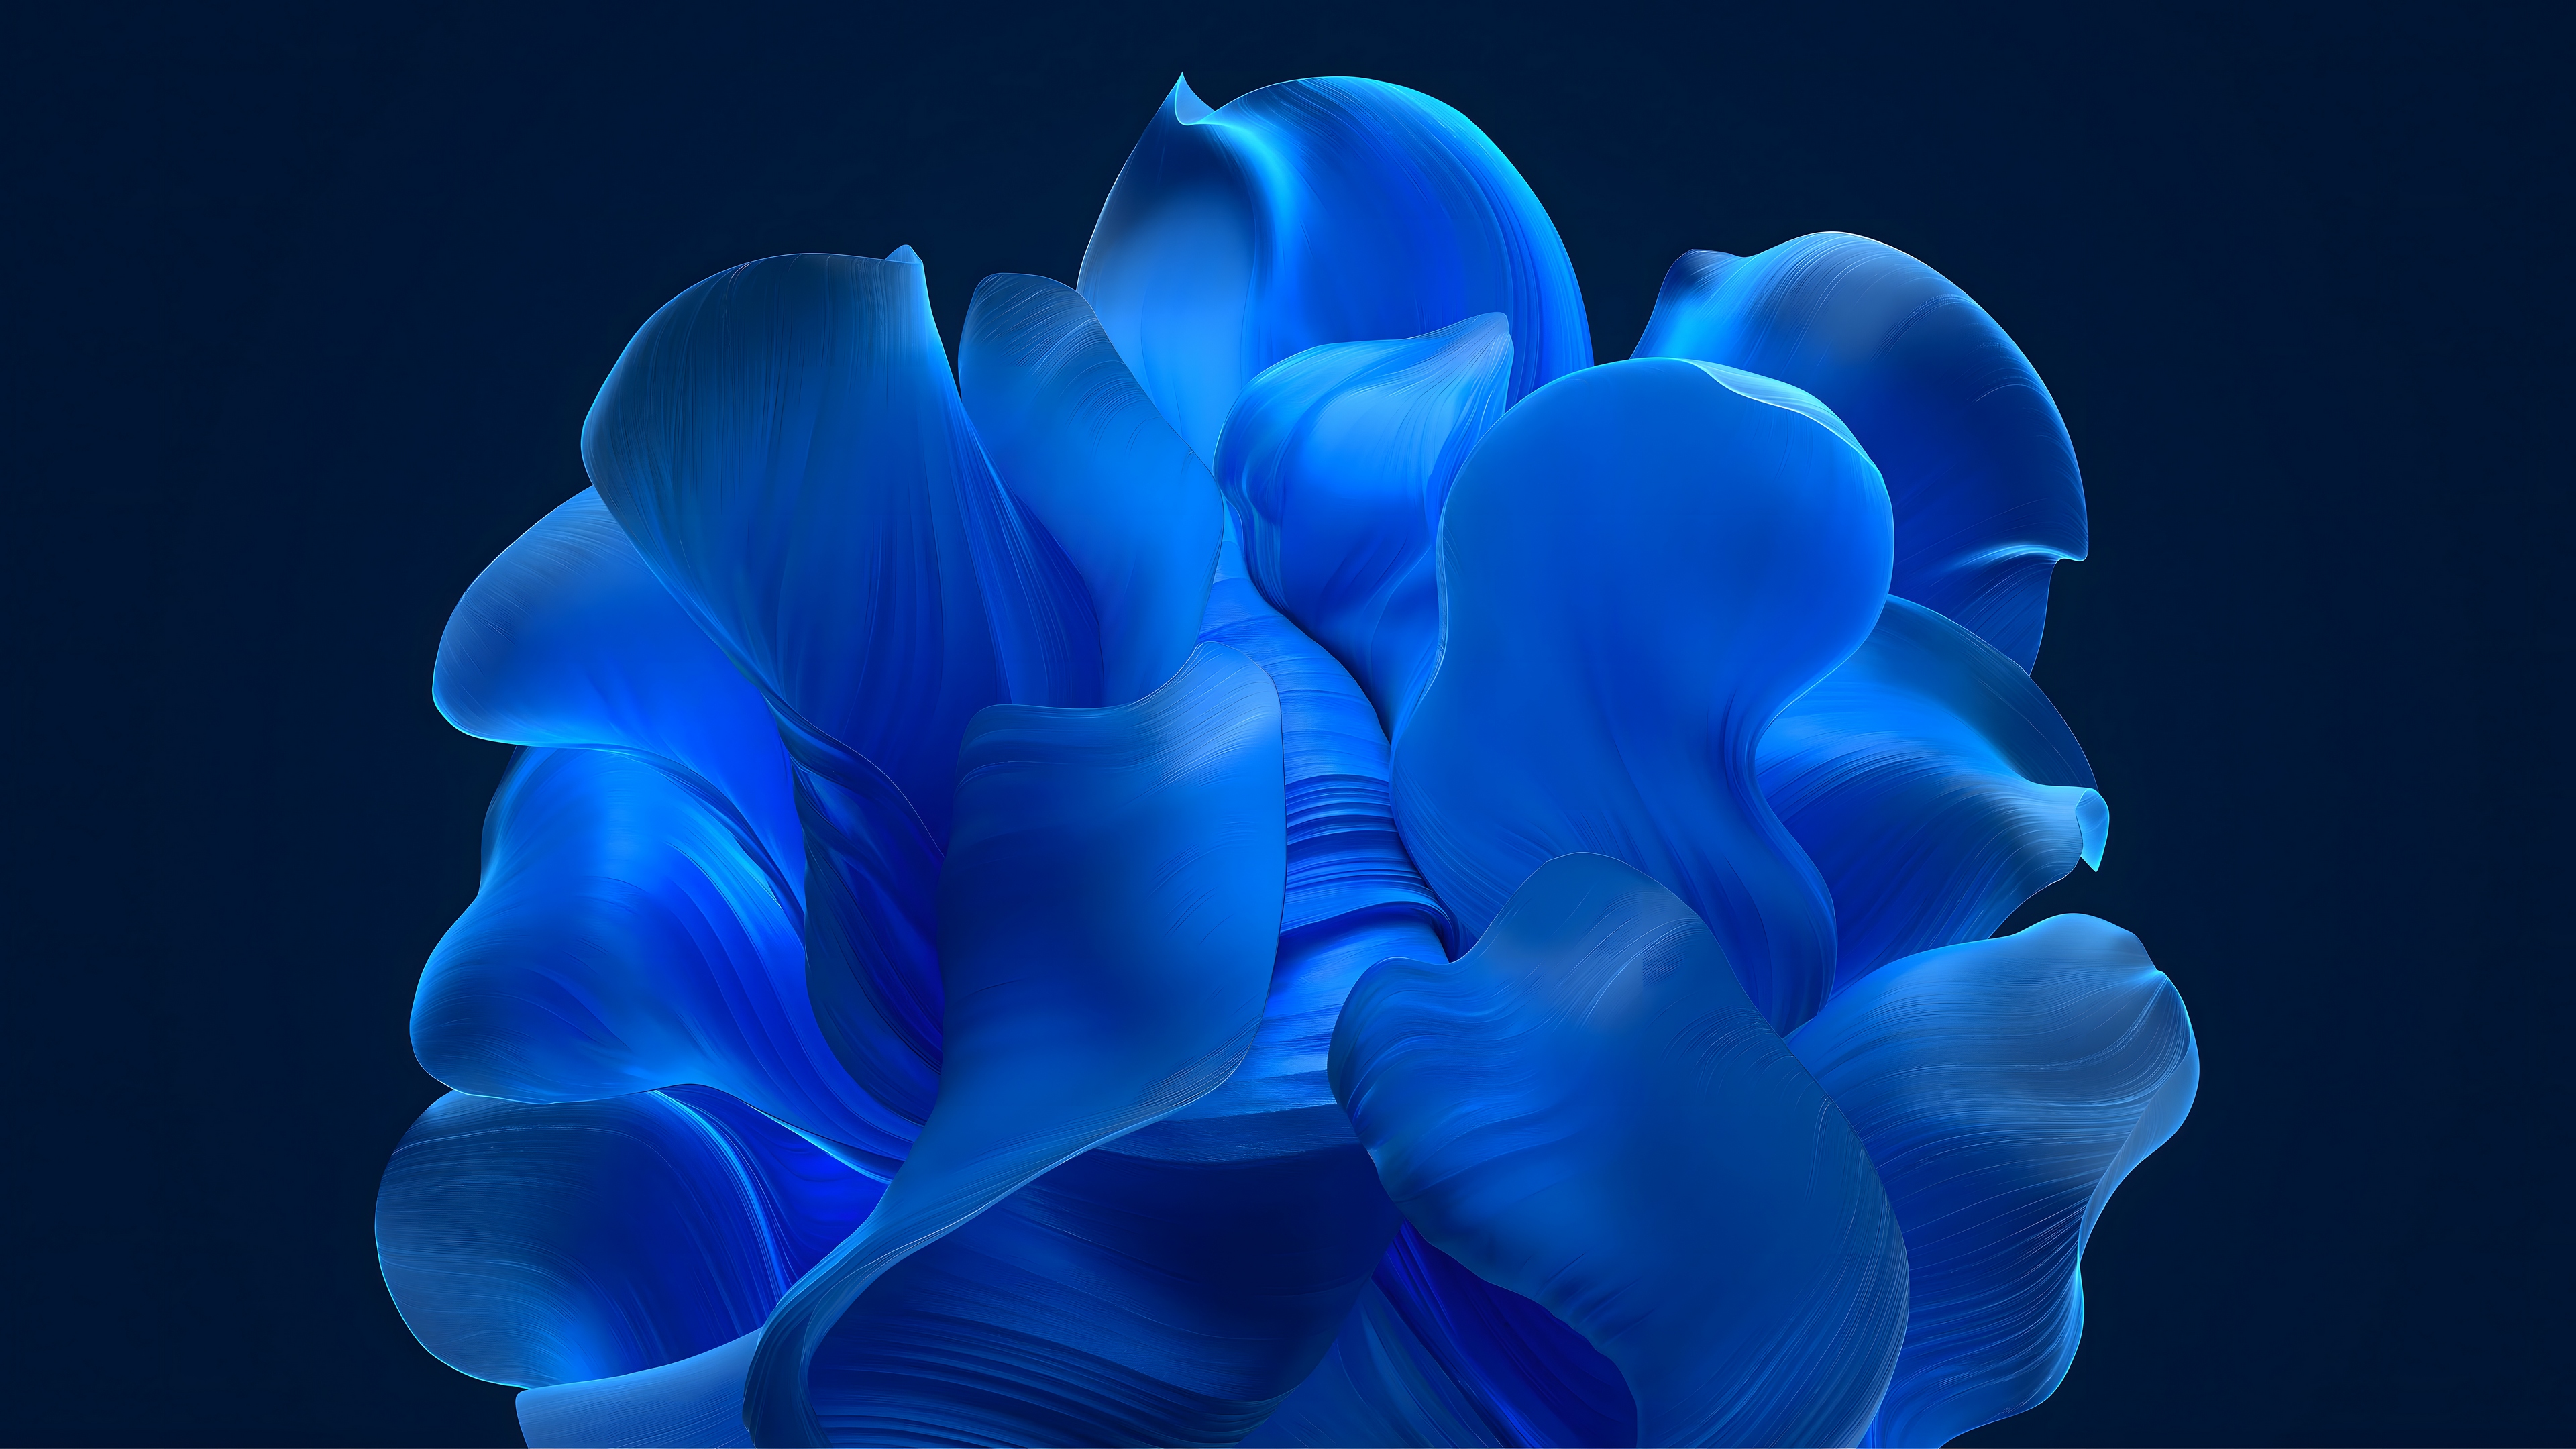 Free photo Waves in the form of a flower petal